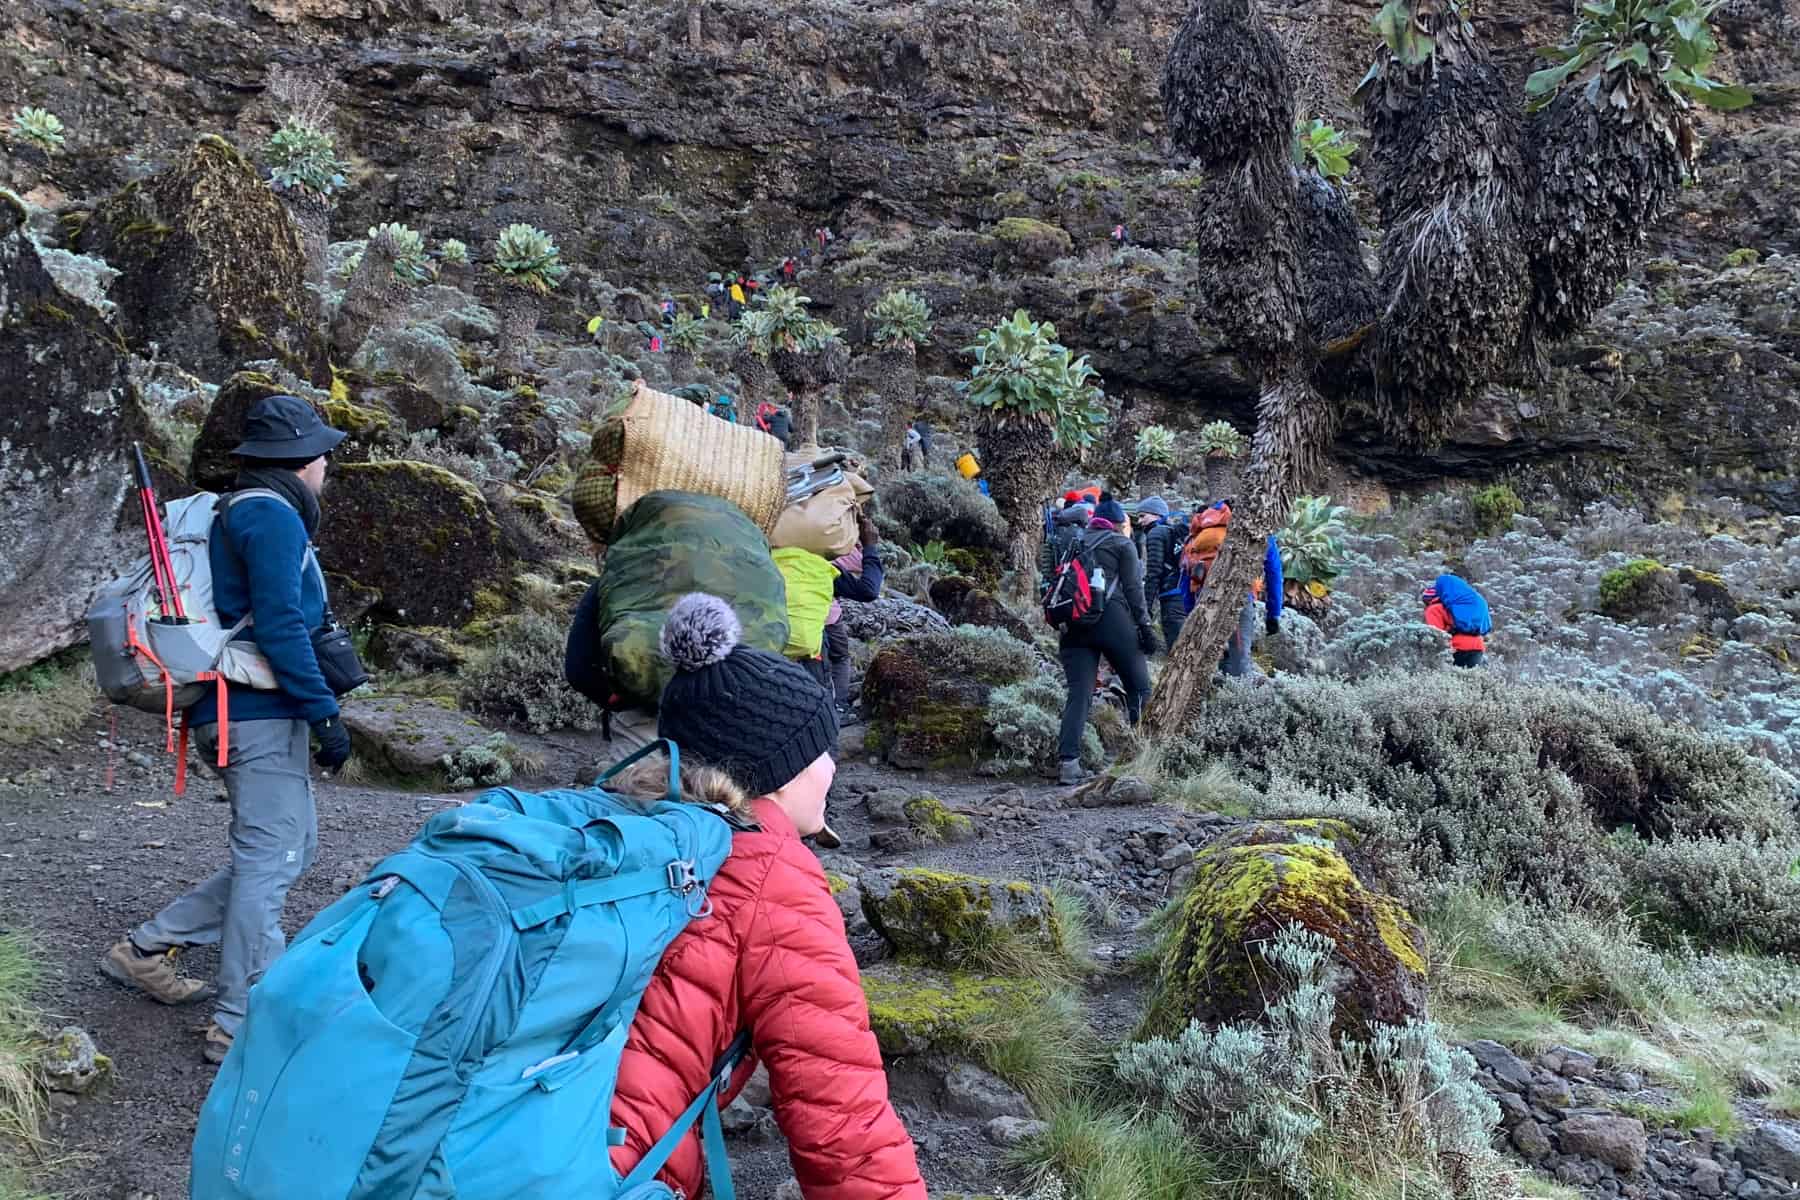 A woman in a red jacket and blue backpack clambers over low rocks and vivid green bushes towards a large rock wall where other people are walking.